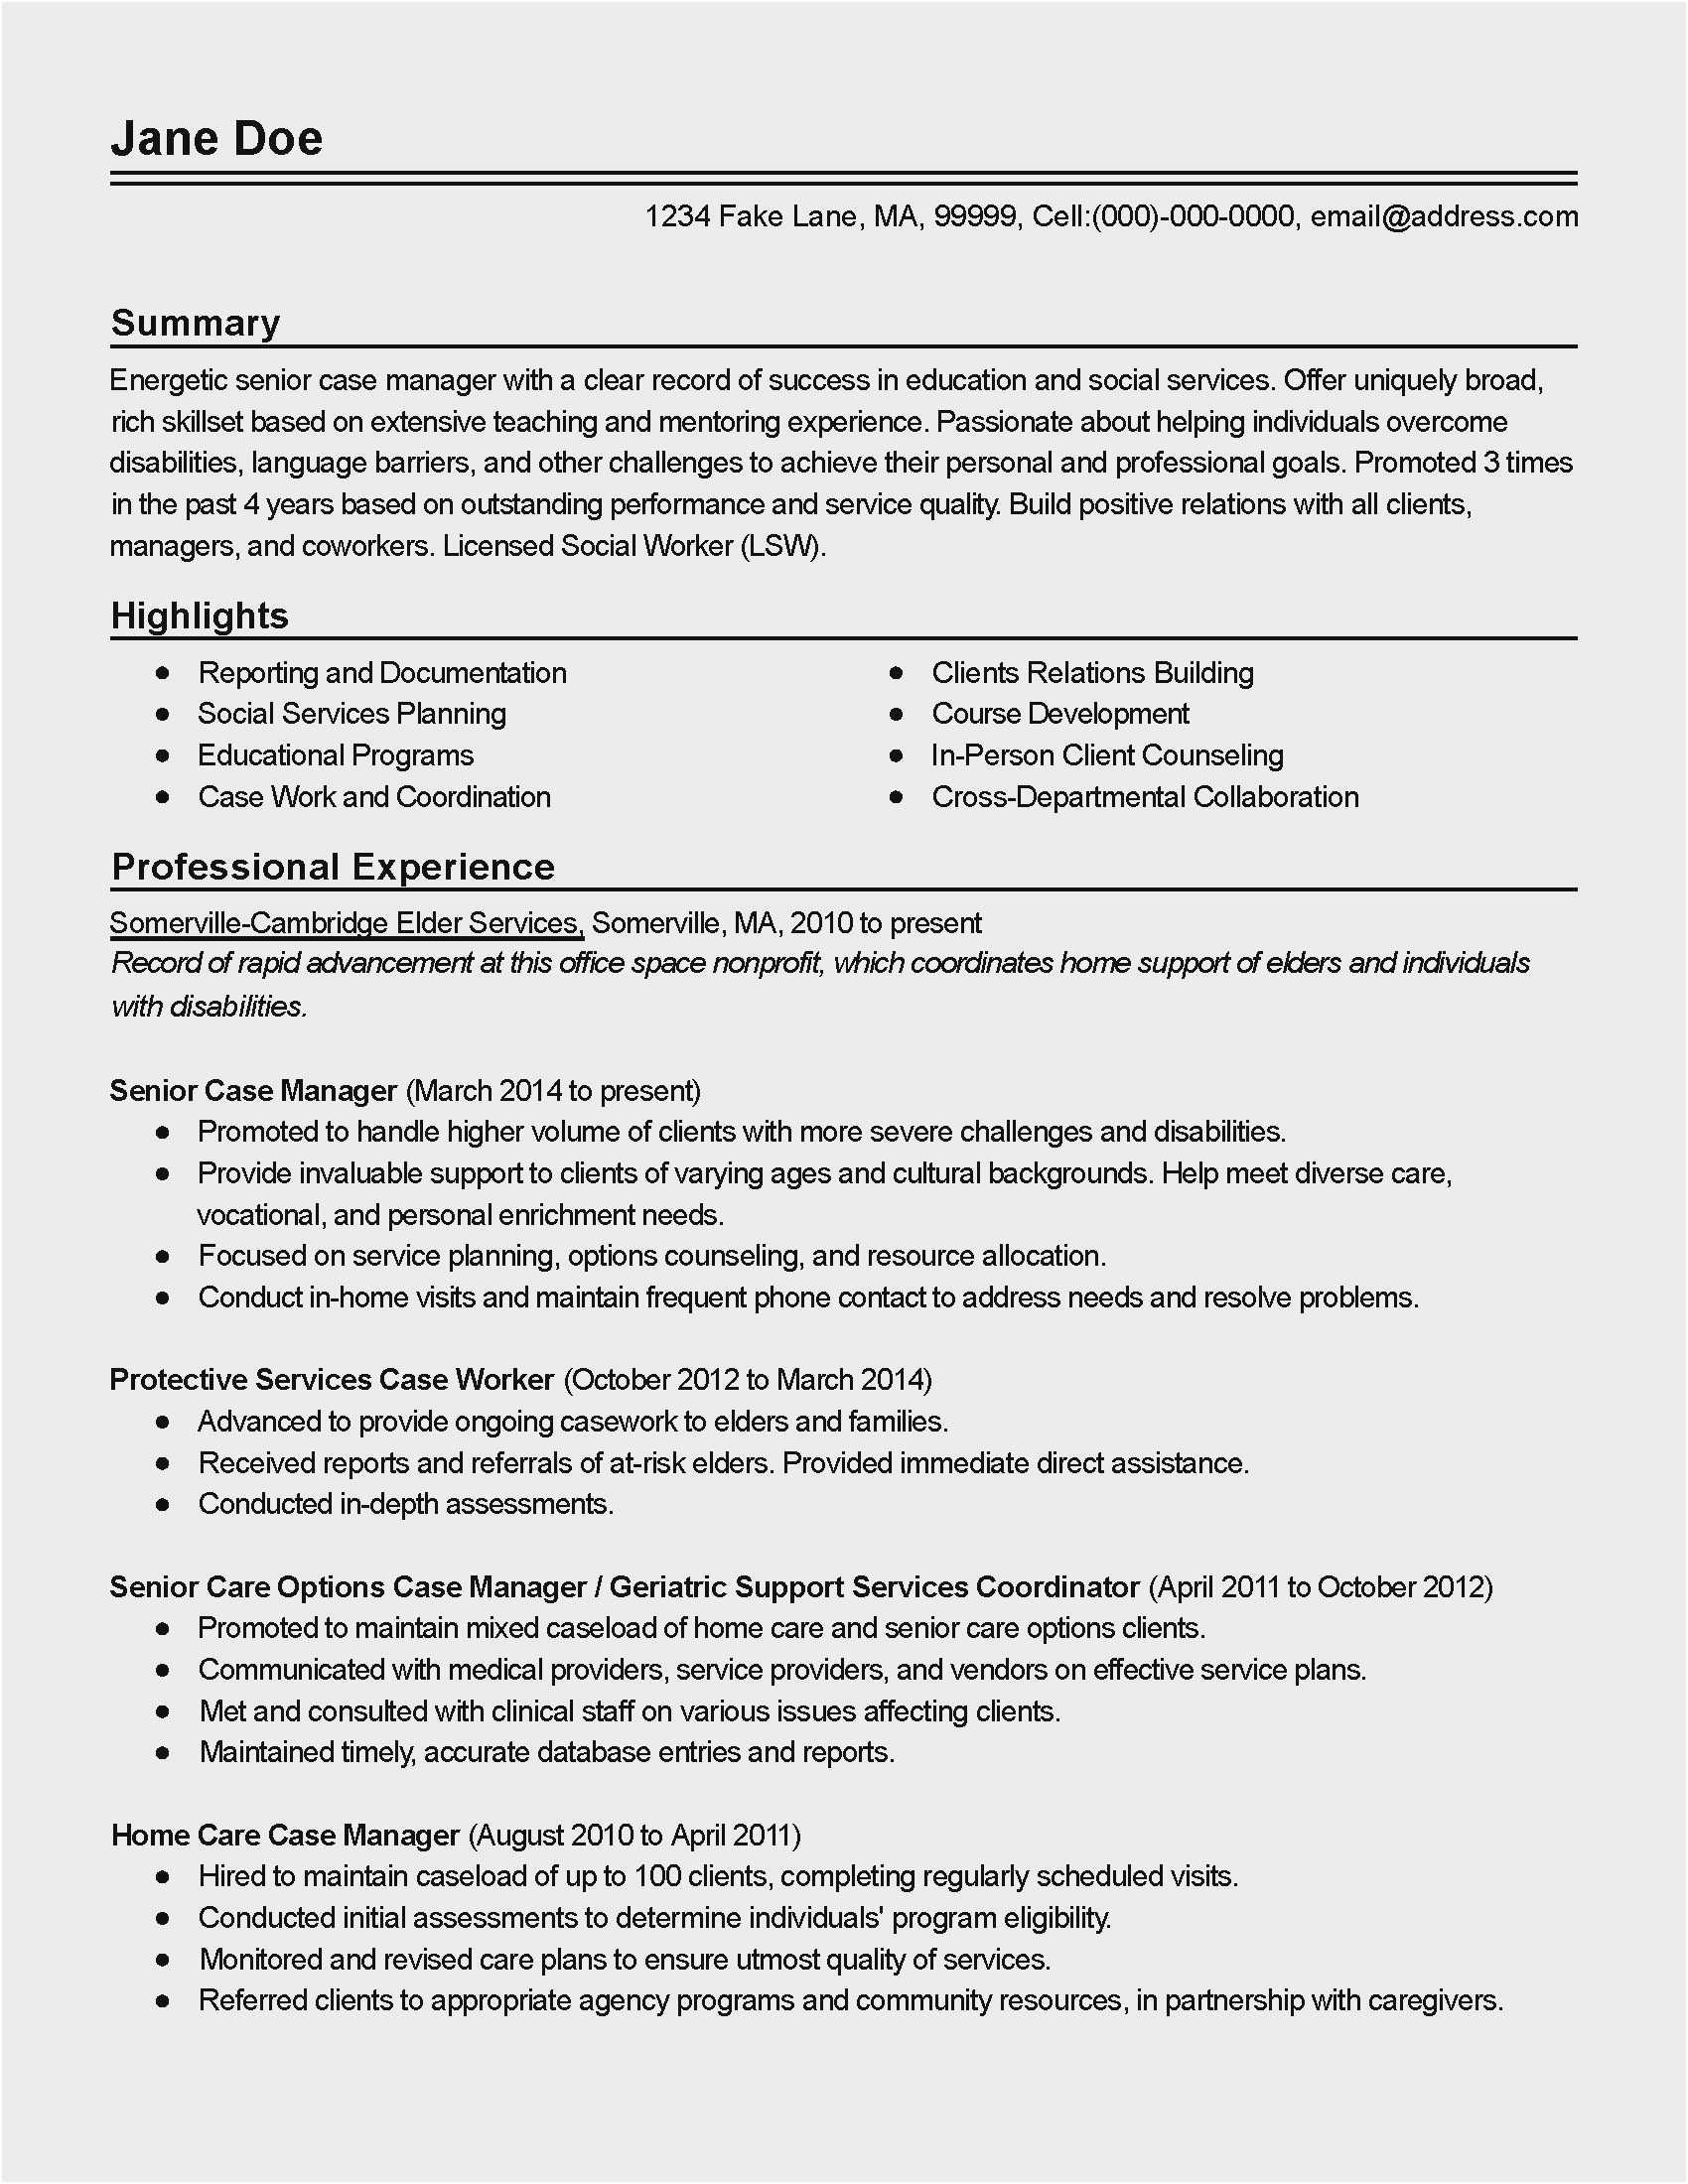 Sample Resume for Direct Support Professional Direct Support Professional Resume New 58